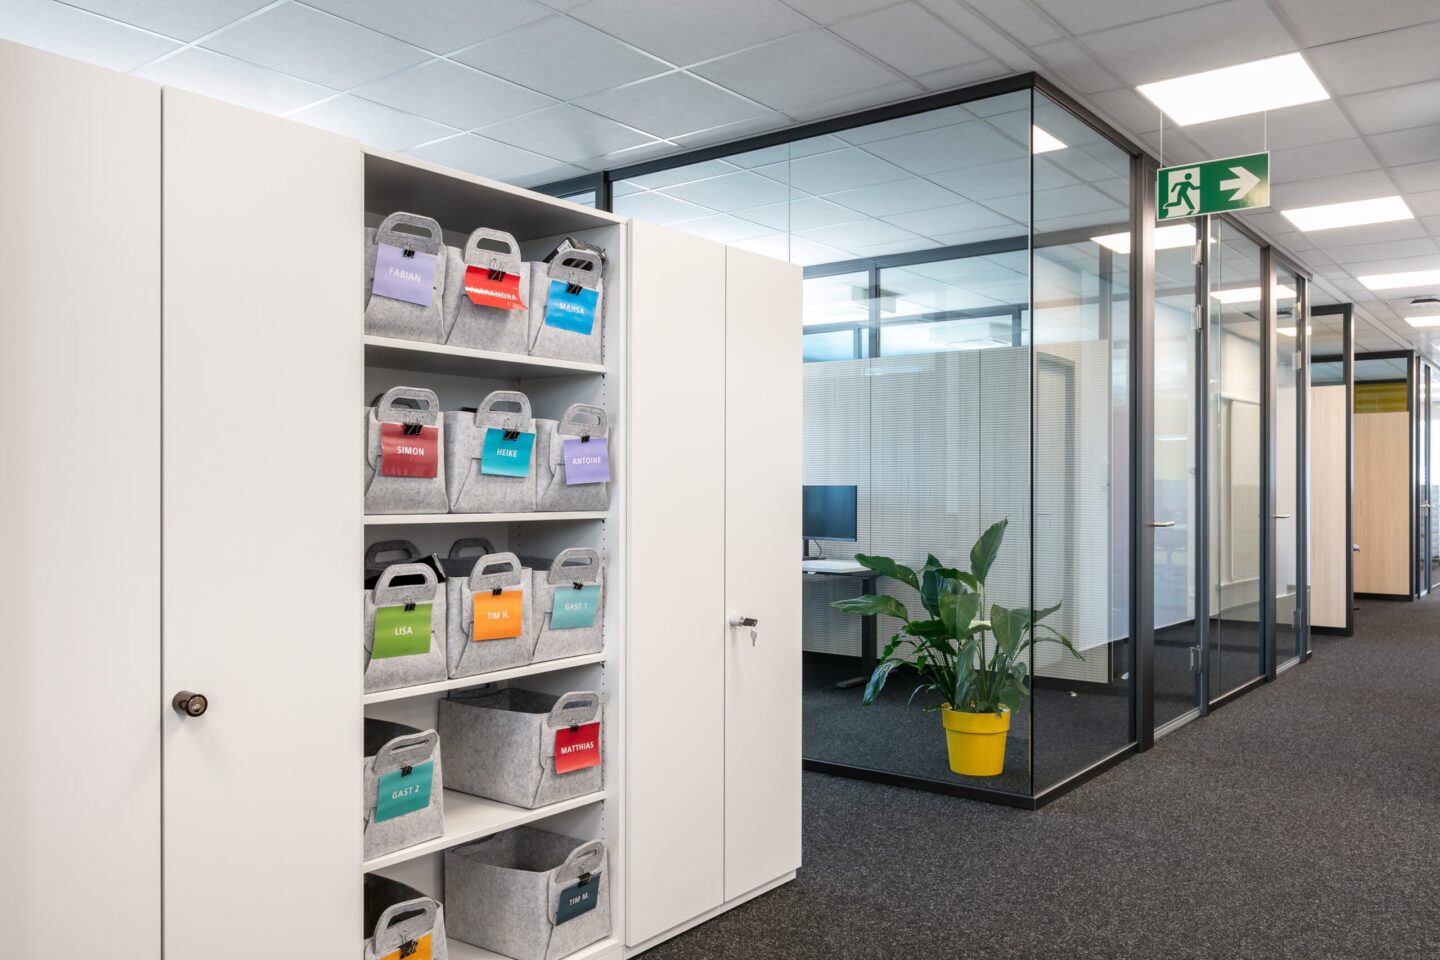 Fraunhofer ISI, Karlsruhe Technology Park │ modern office furnishings with feco │ storage space